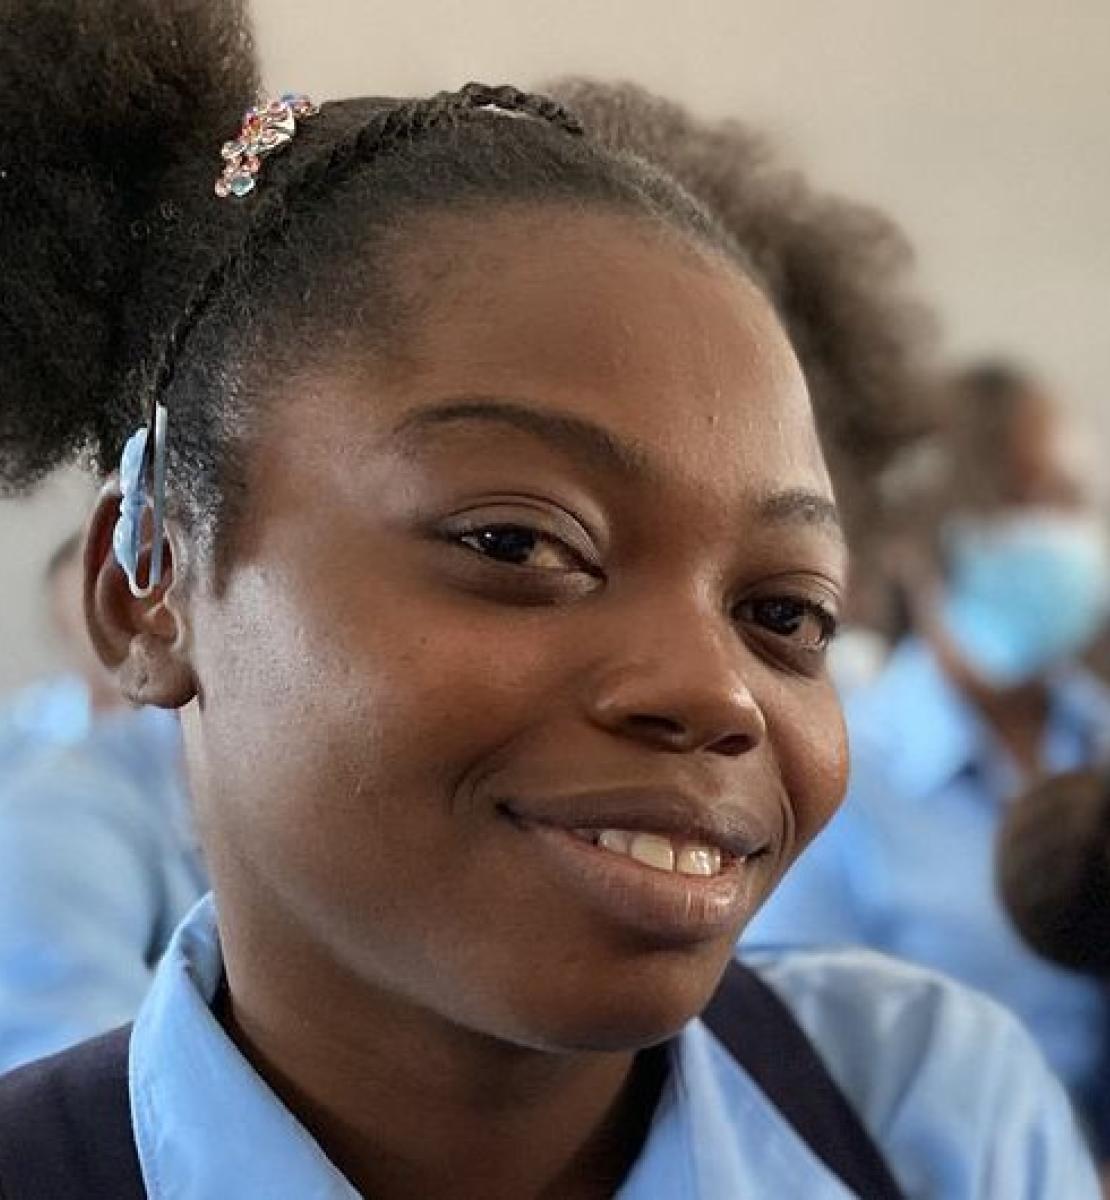 One girl in her school uniform smiles at the camera while the rest of the students stare at the centre of the classroom. 